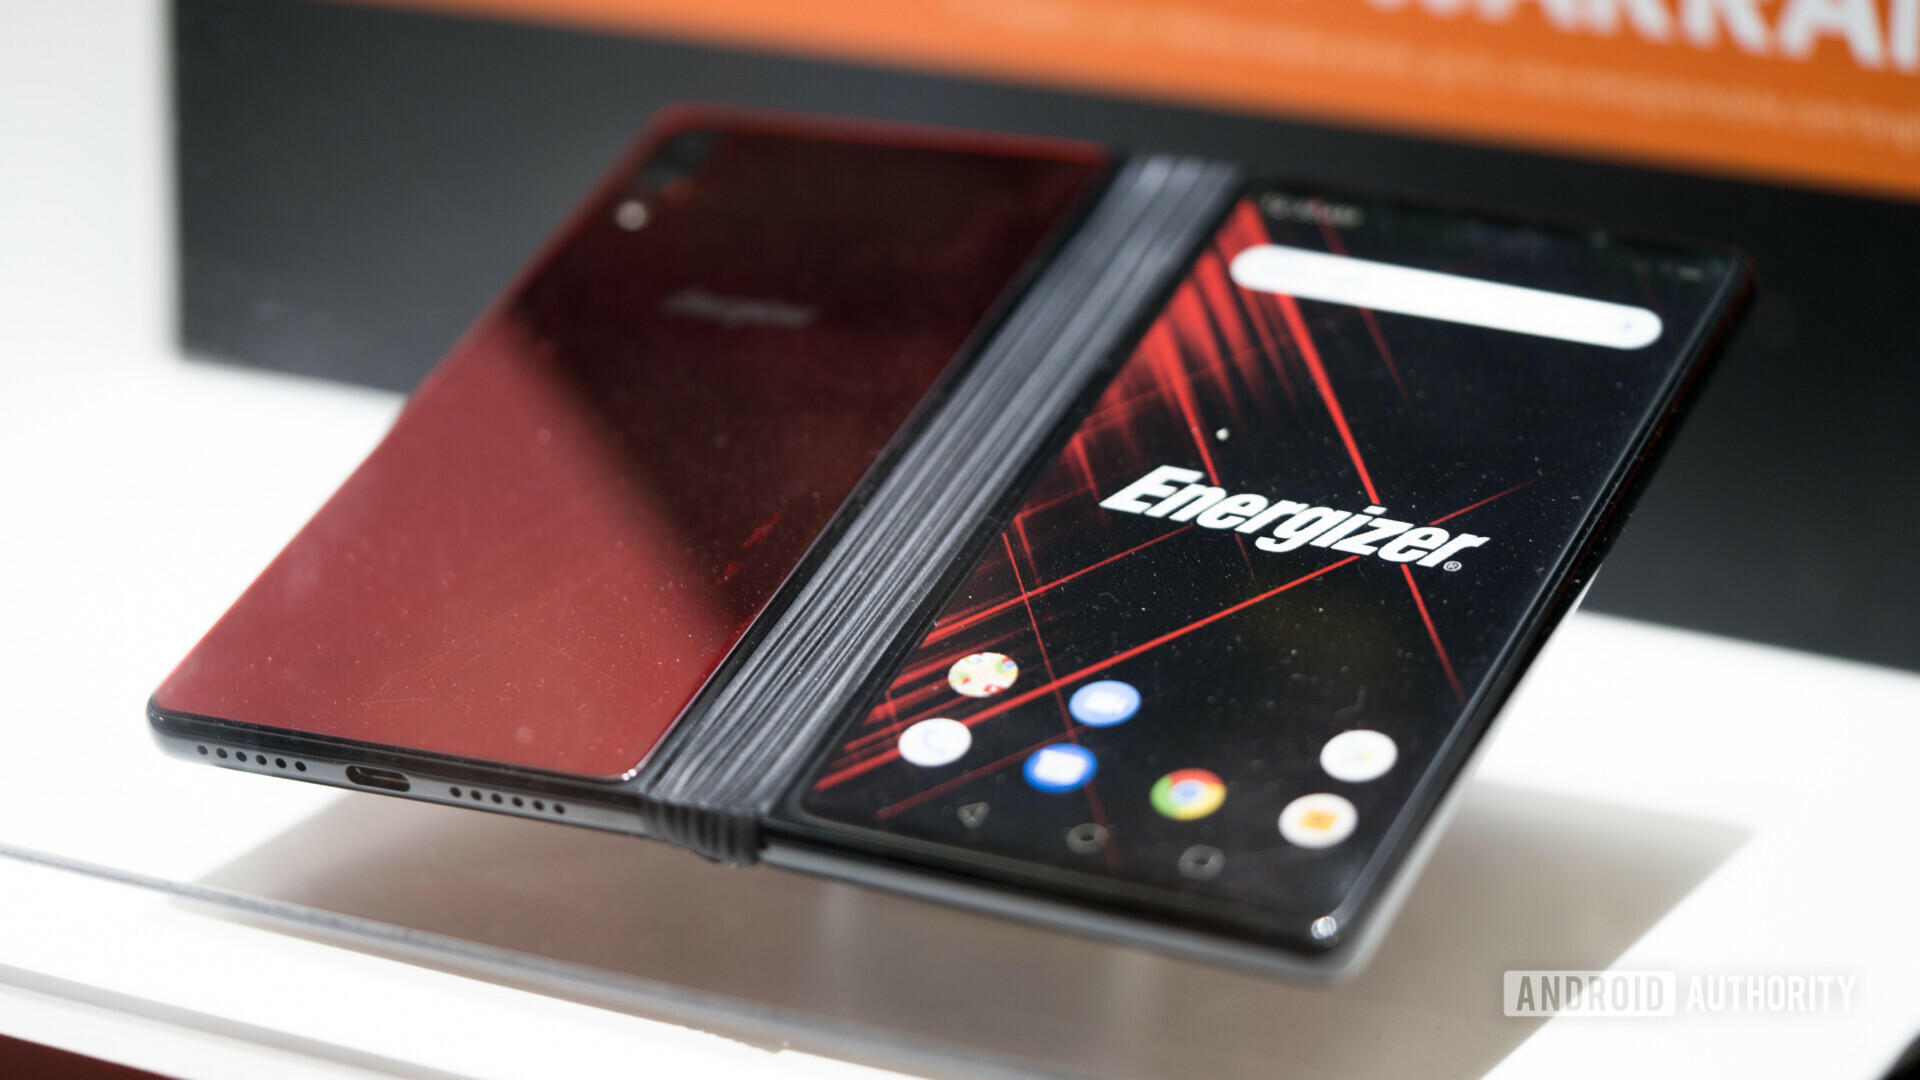 Energizer Power Max P8100S first look mwc 2019 2